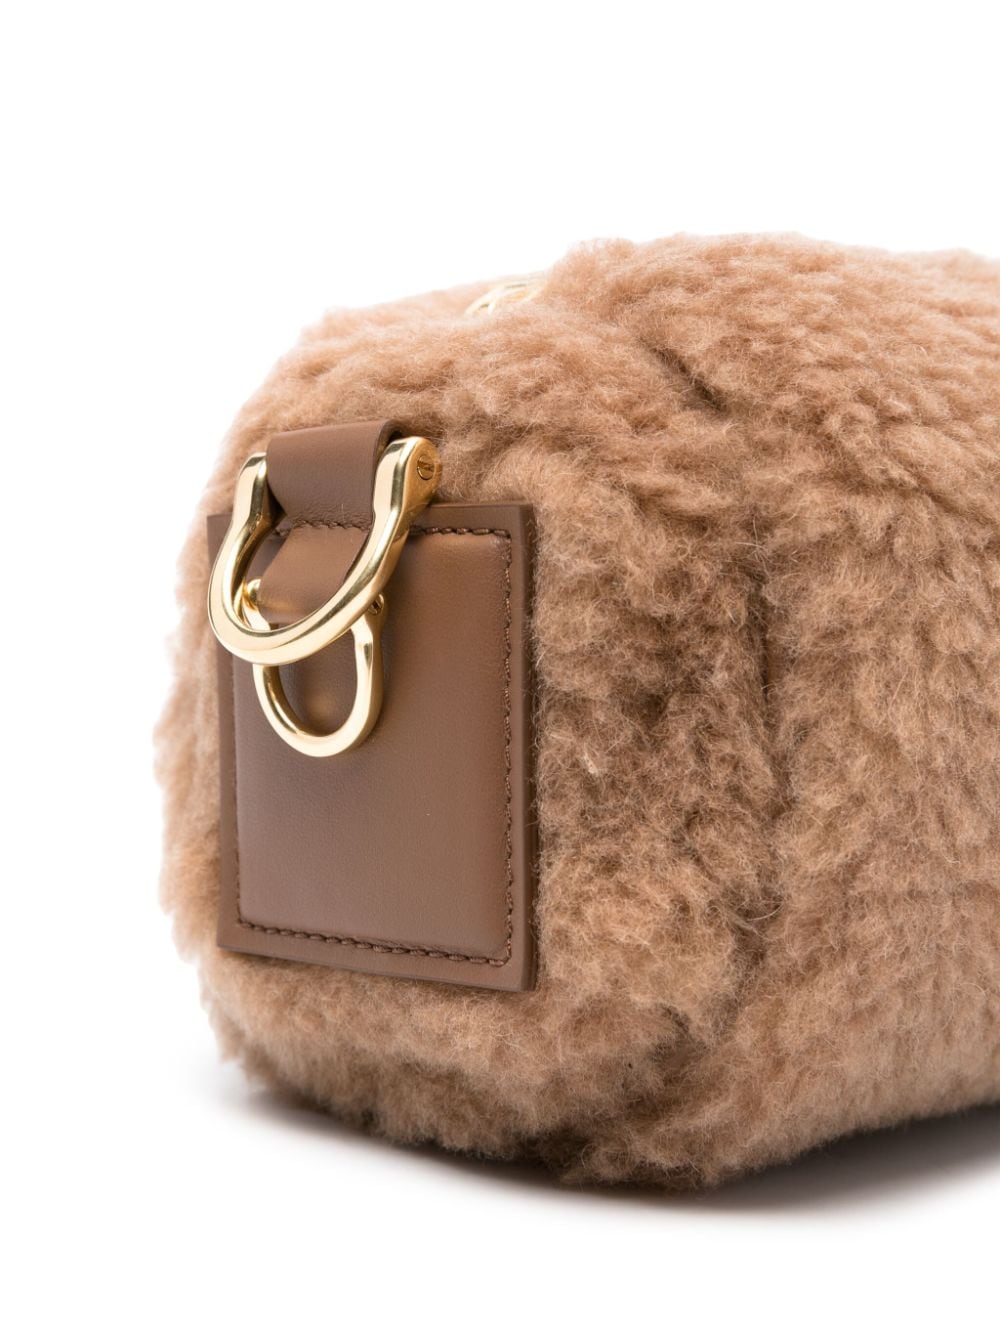 MAX MARA Chic Beige Teddy Fur Small Shoulder Bag with Gold-Tone Accents and Leather Trim